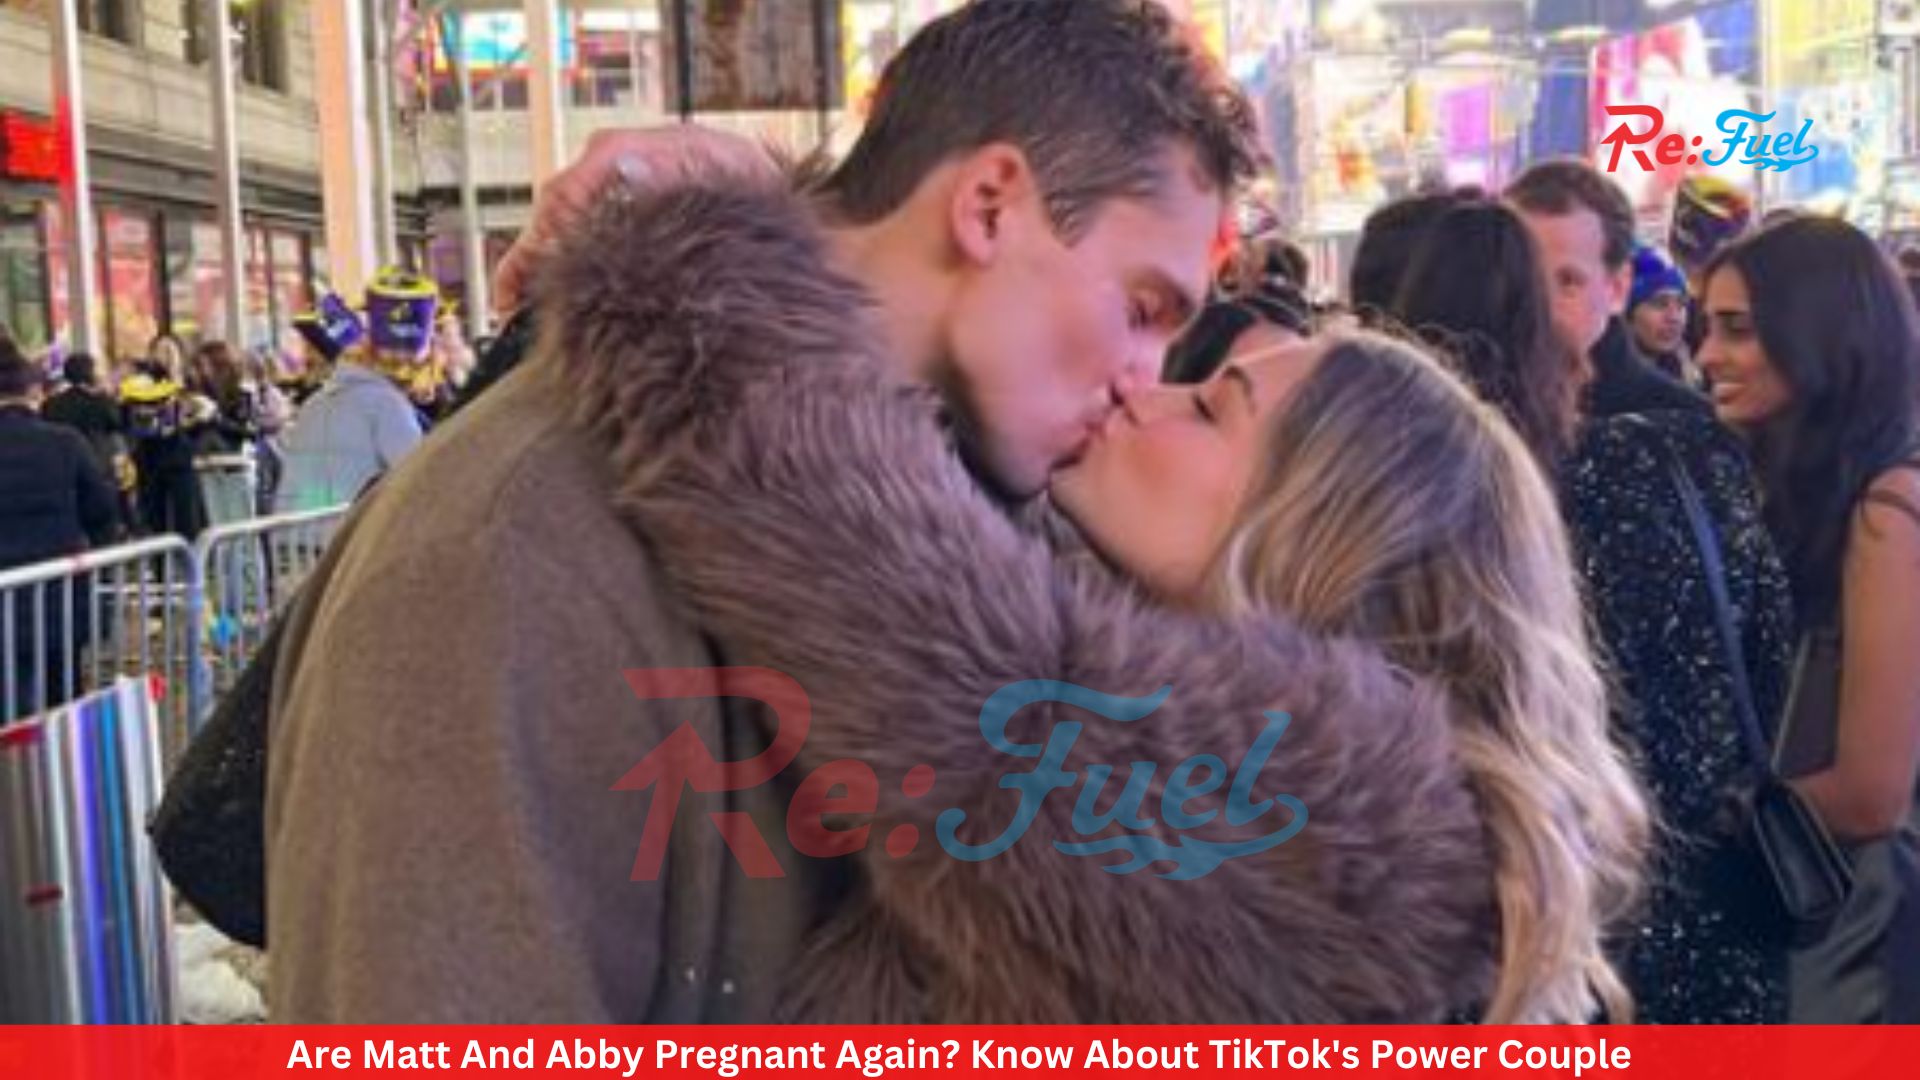 Are Matt And Abby Pregnant Again? Know About TikTok's Power Couple